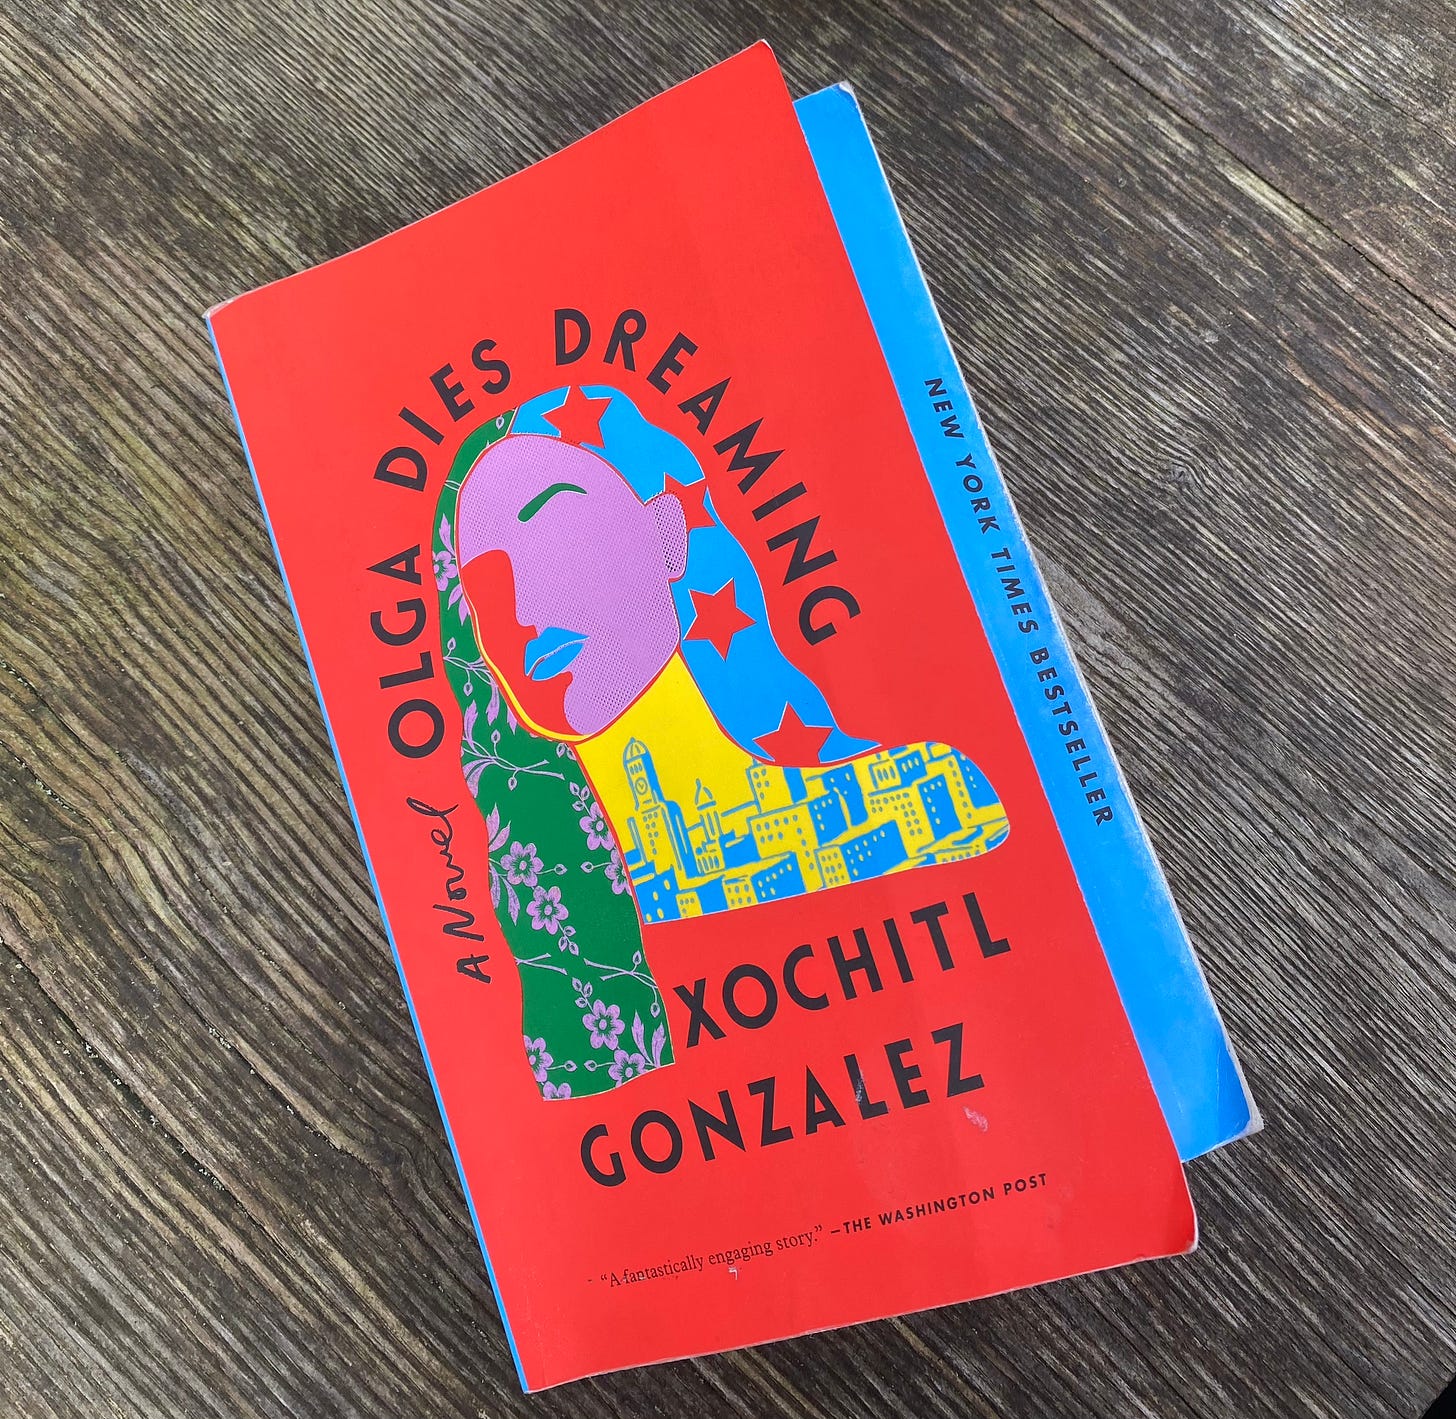 Book "Olga dies dreaming" by Xochitl Gonzalez on wooden table. Book is red and blue, with an illustration of a female figure with long hair on the cover. The illustration is colourful